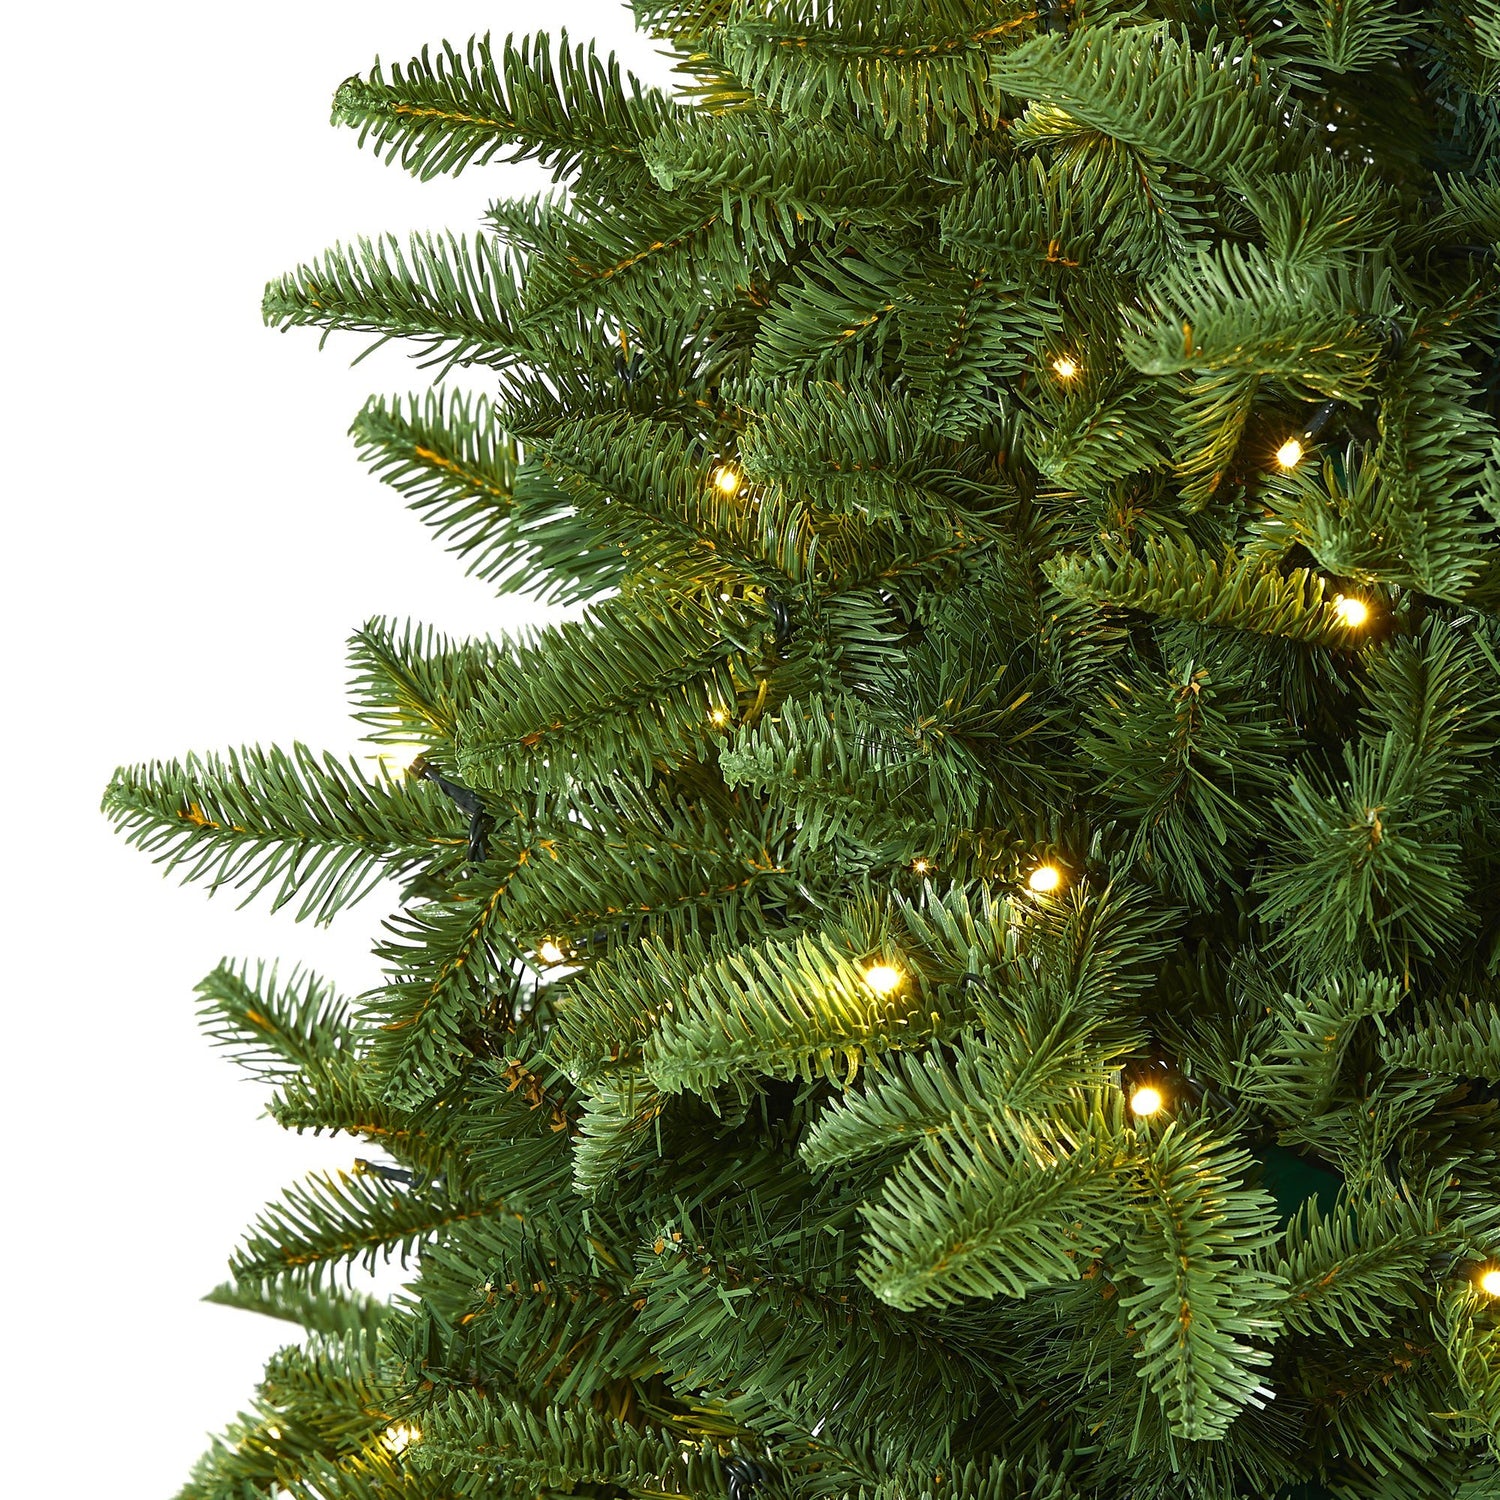 5’ Wyoming Fir Artificial Christmas Tree with 250 Clear LED Lights and 630 Bendable Branches